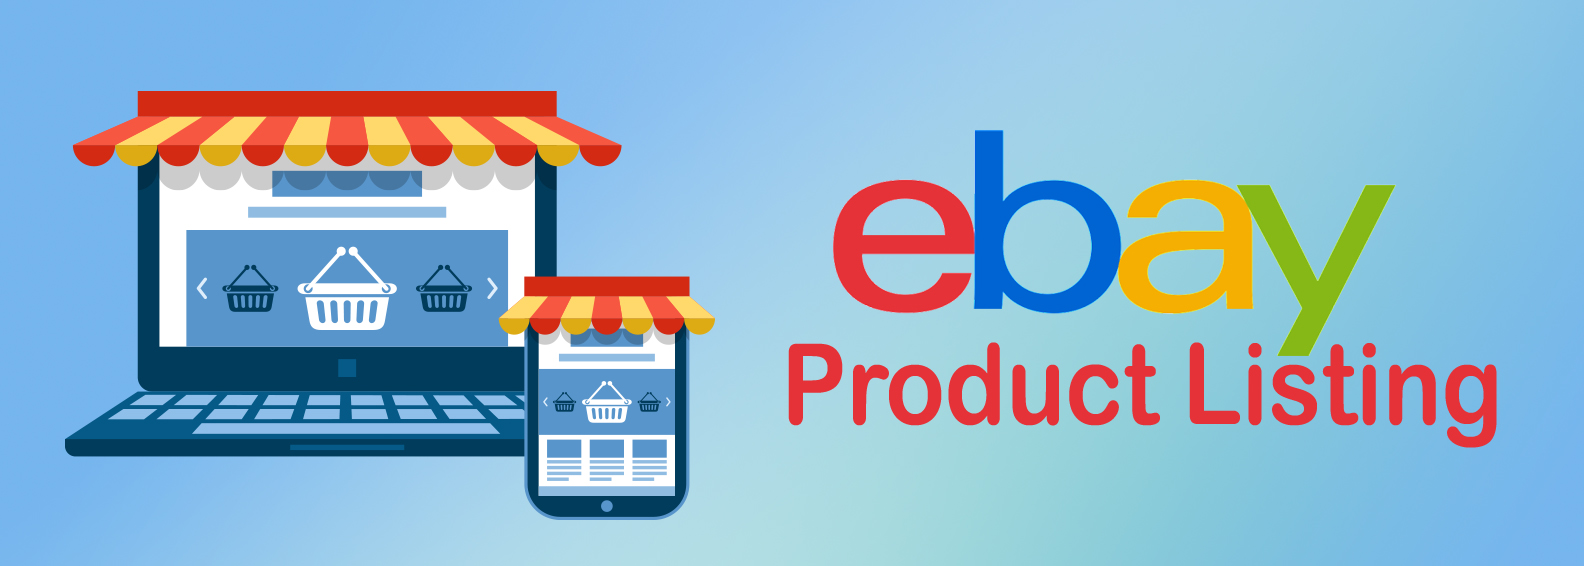 Outsource ebay Product Listing Services for businesses